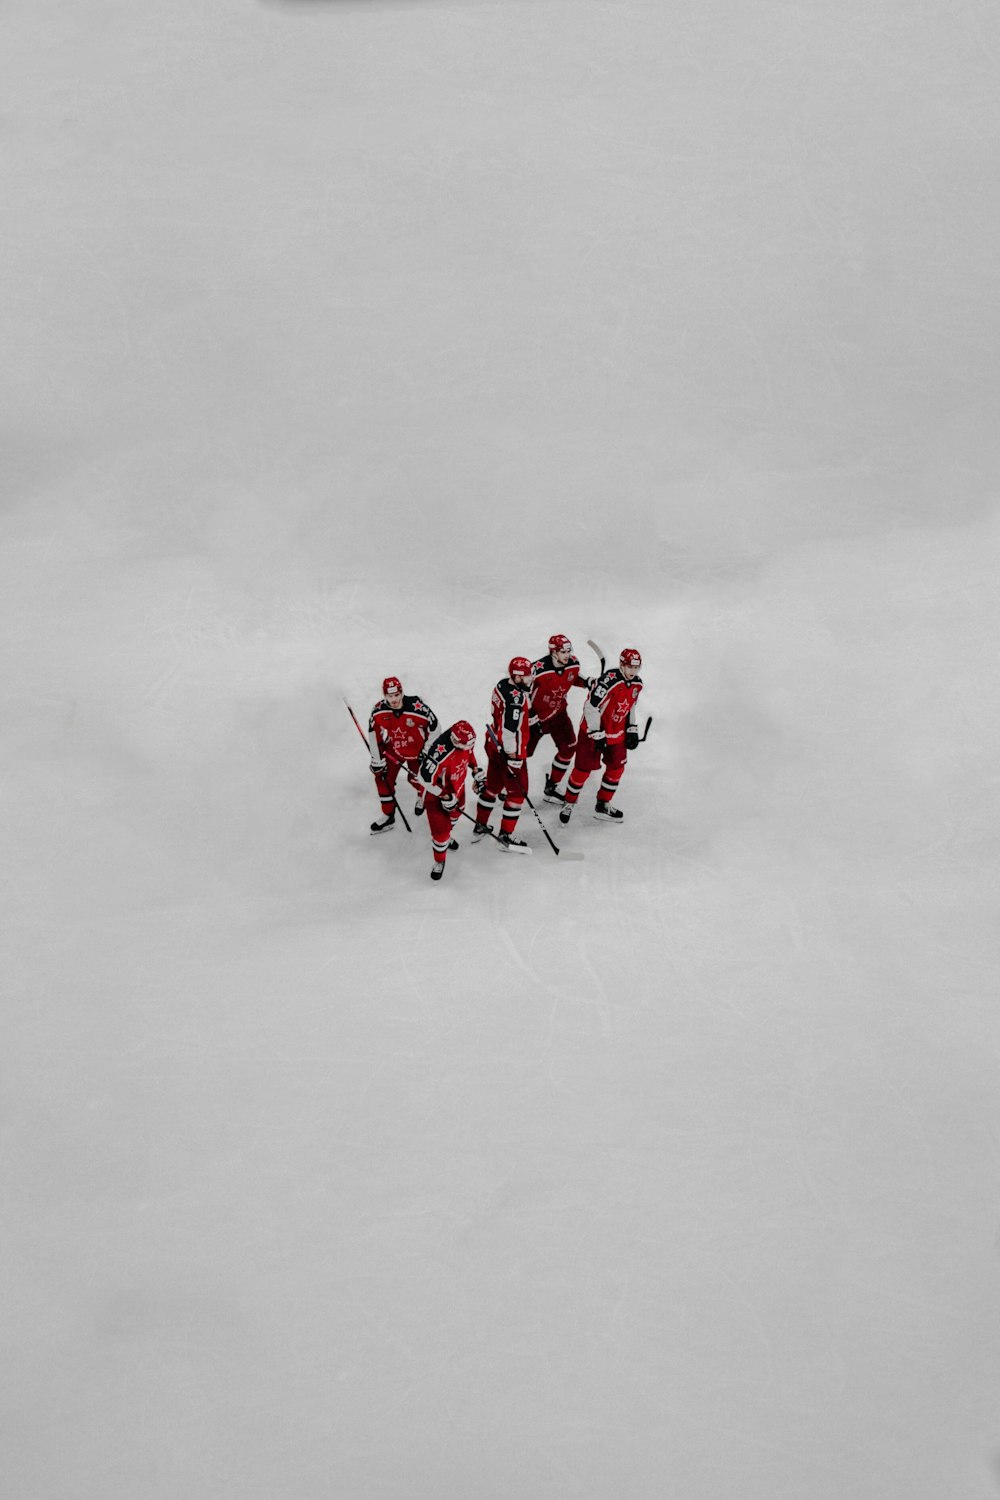 people in red jacket and pants playing ice hockey on snow covered field during daytime